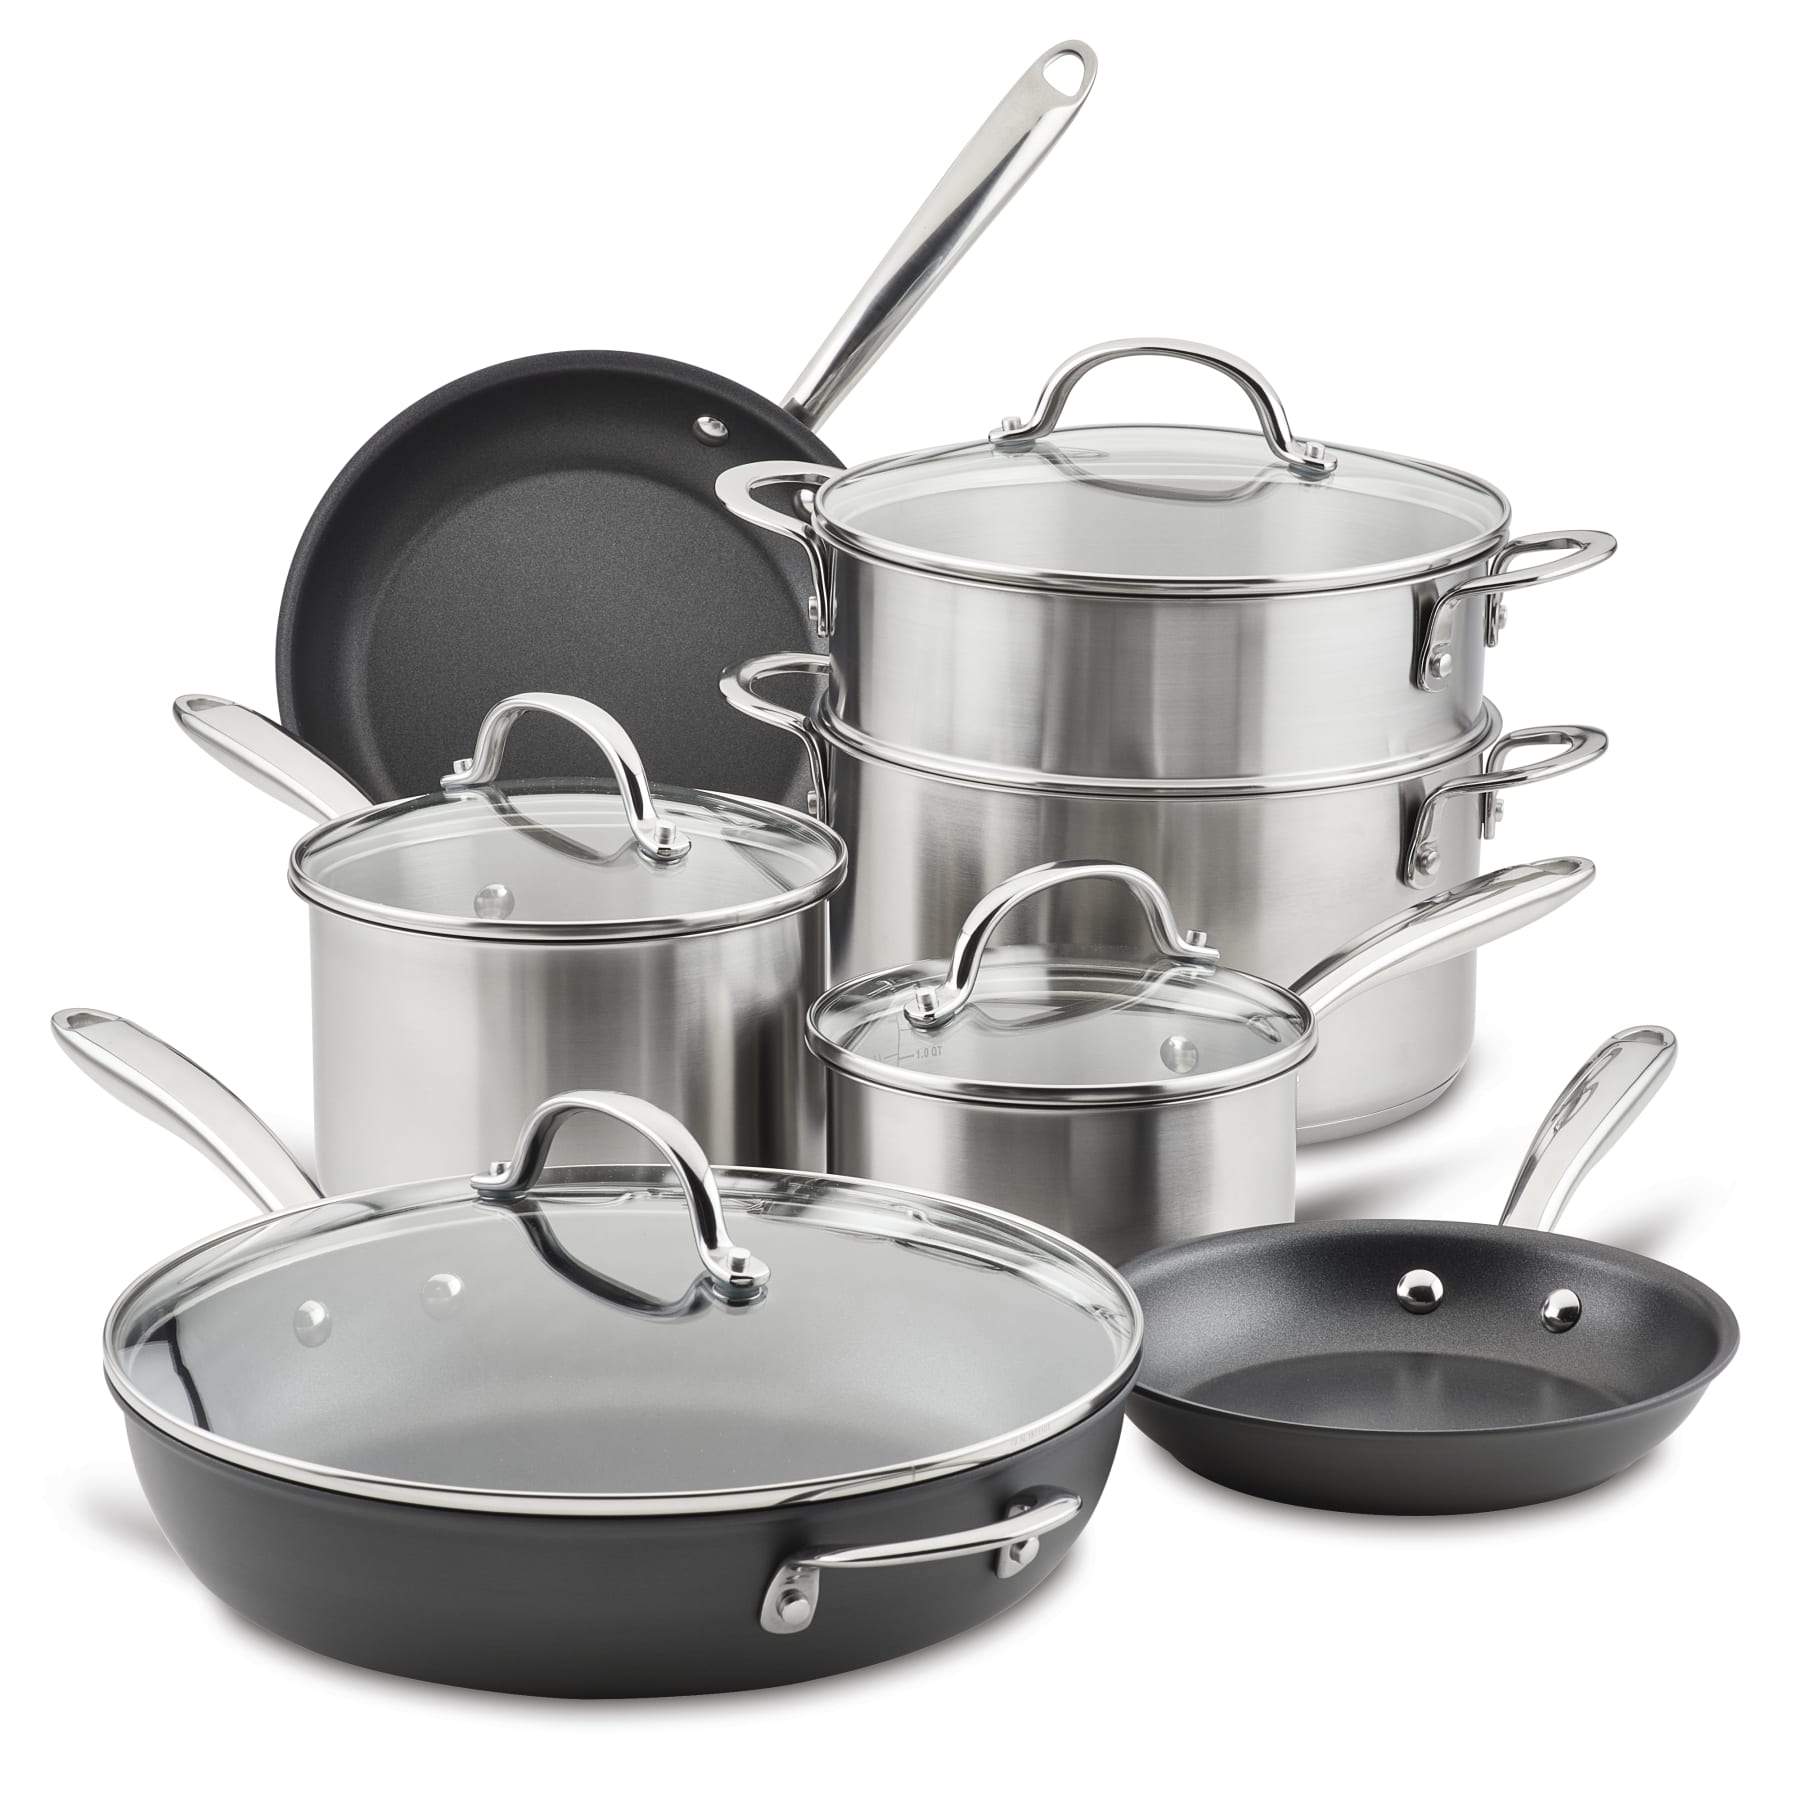 Stainless Steel and Hard-Anodized Cookware Set